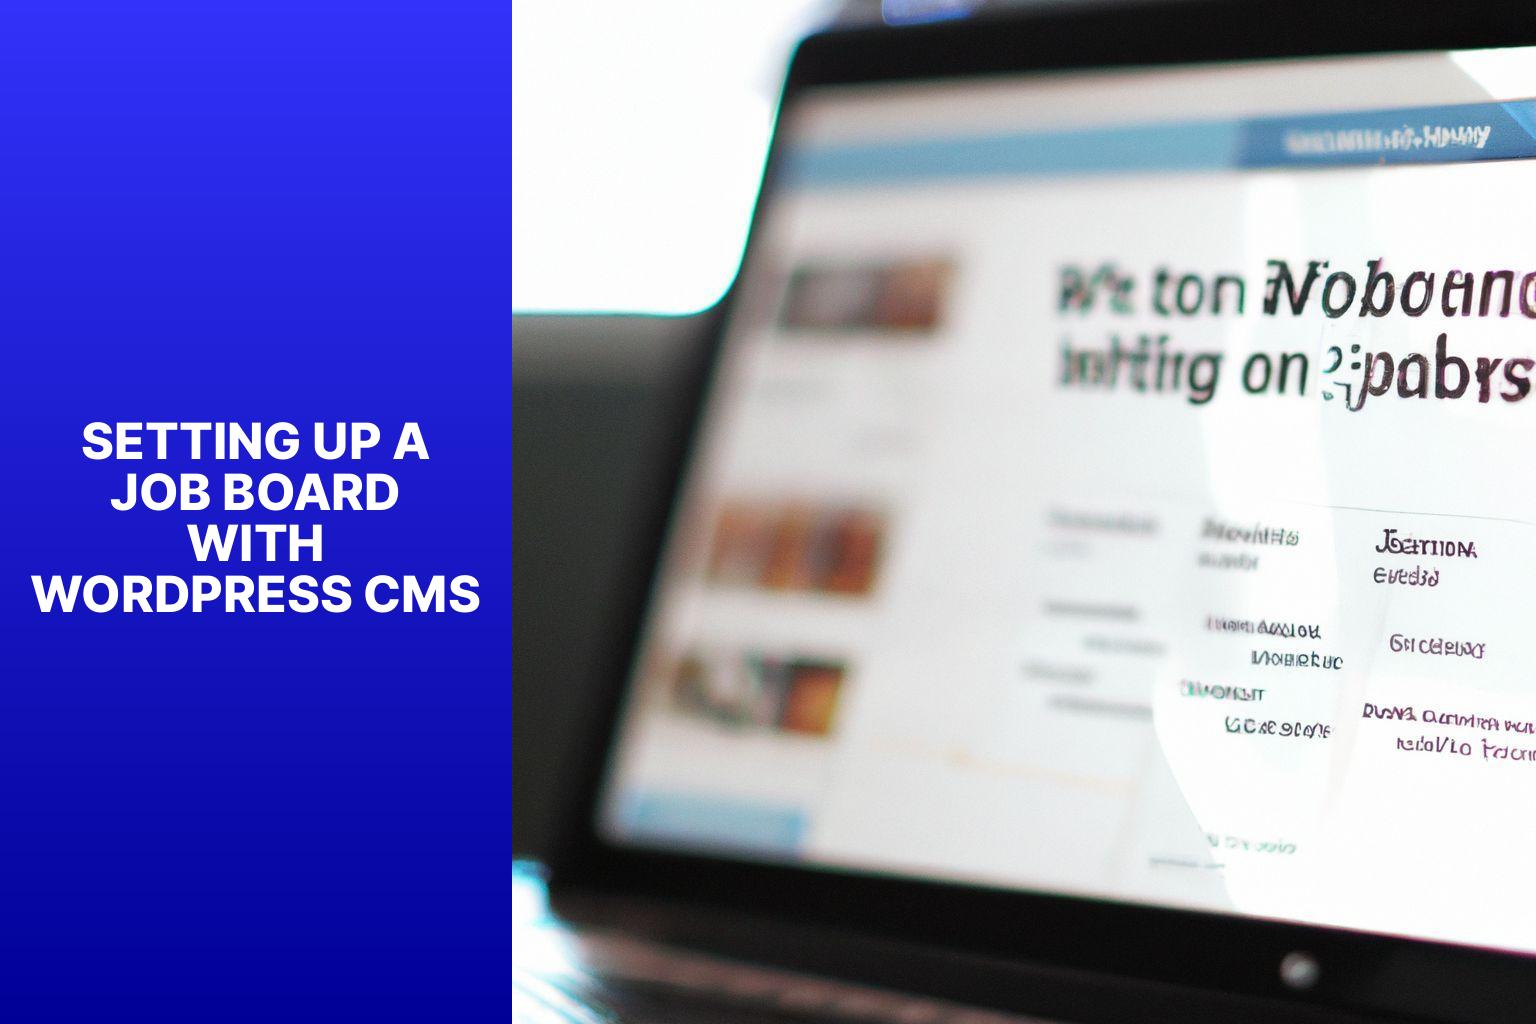 Setting Up a Job Board with WordPress CMS - The Role of WordPress CMS in Job Board Management 